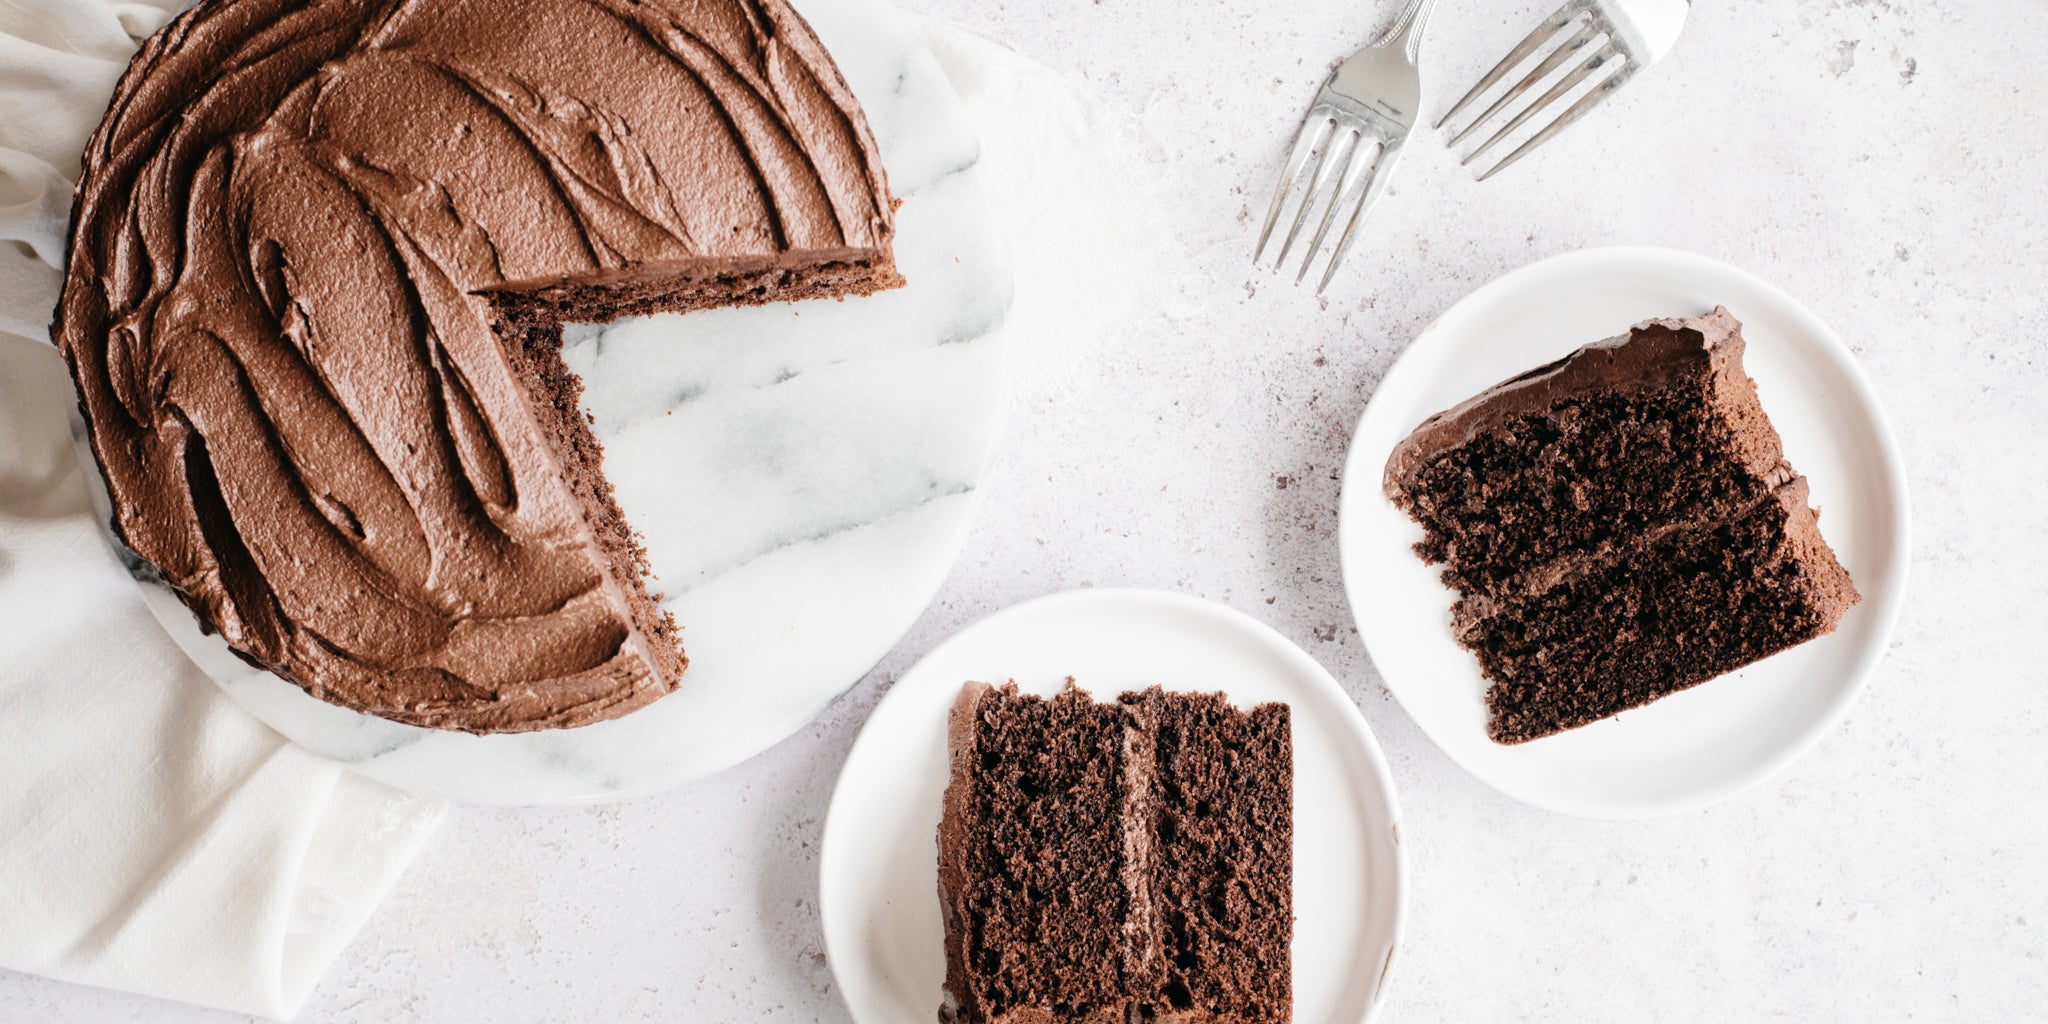 Top down shot of chocolate cake with two slices removed and two forks